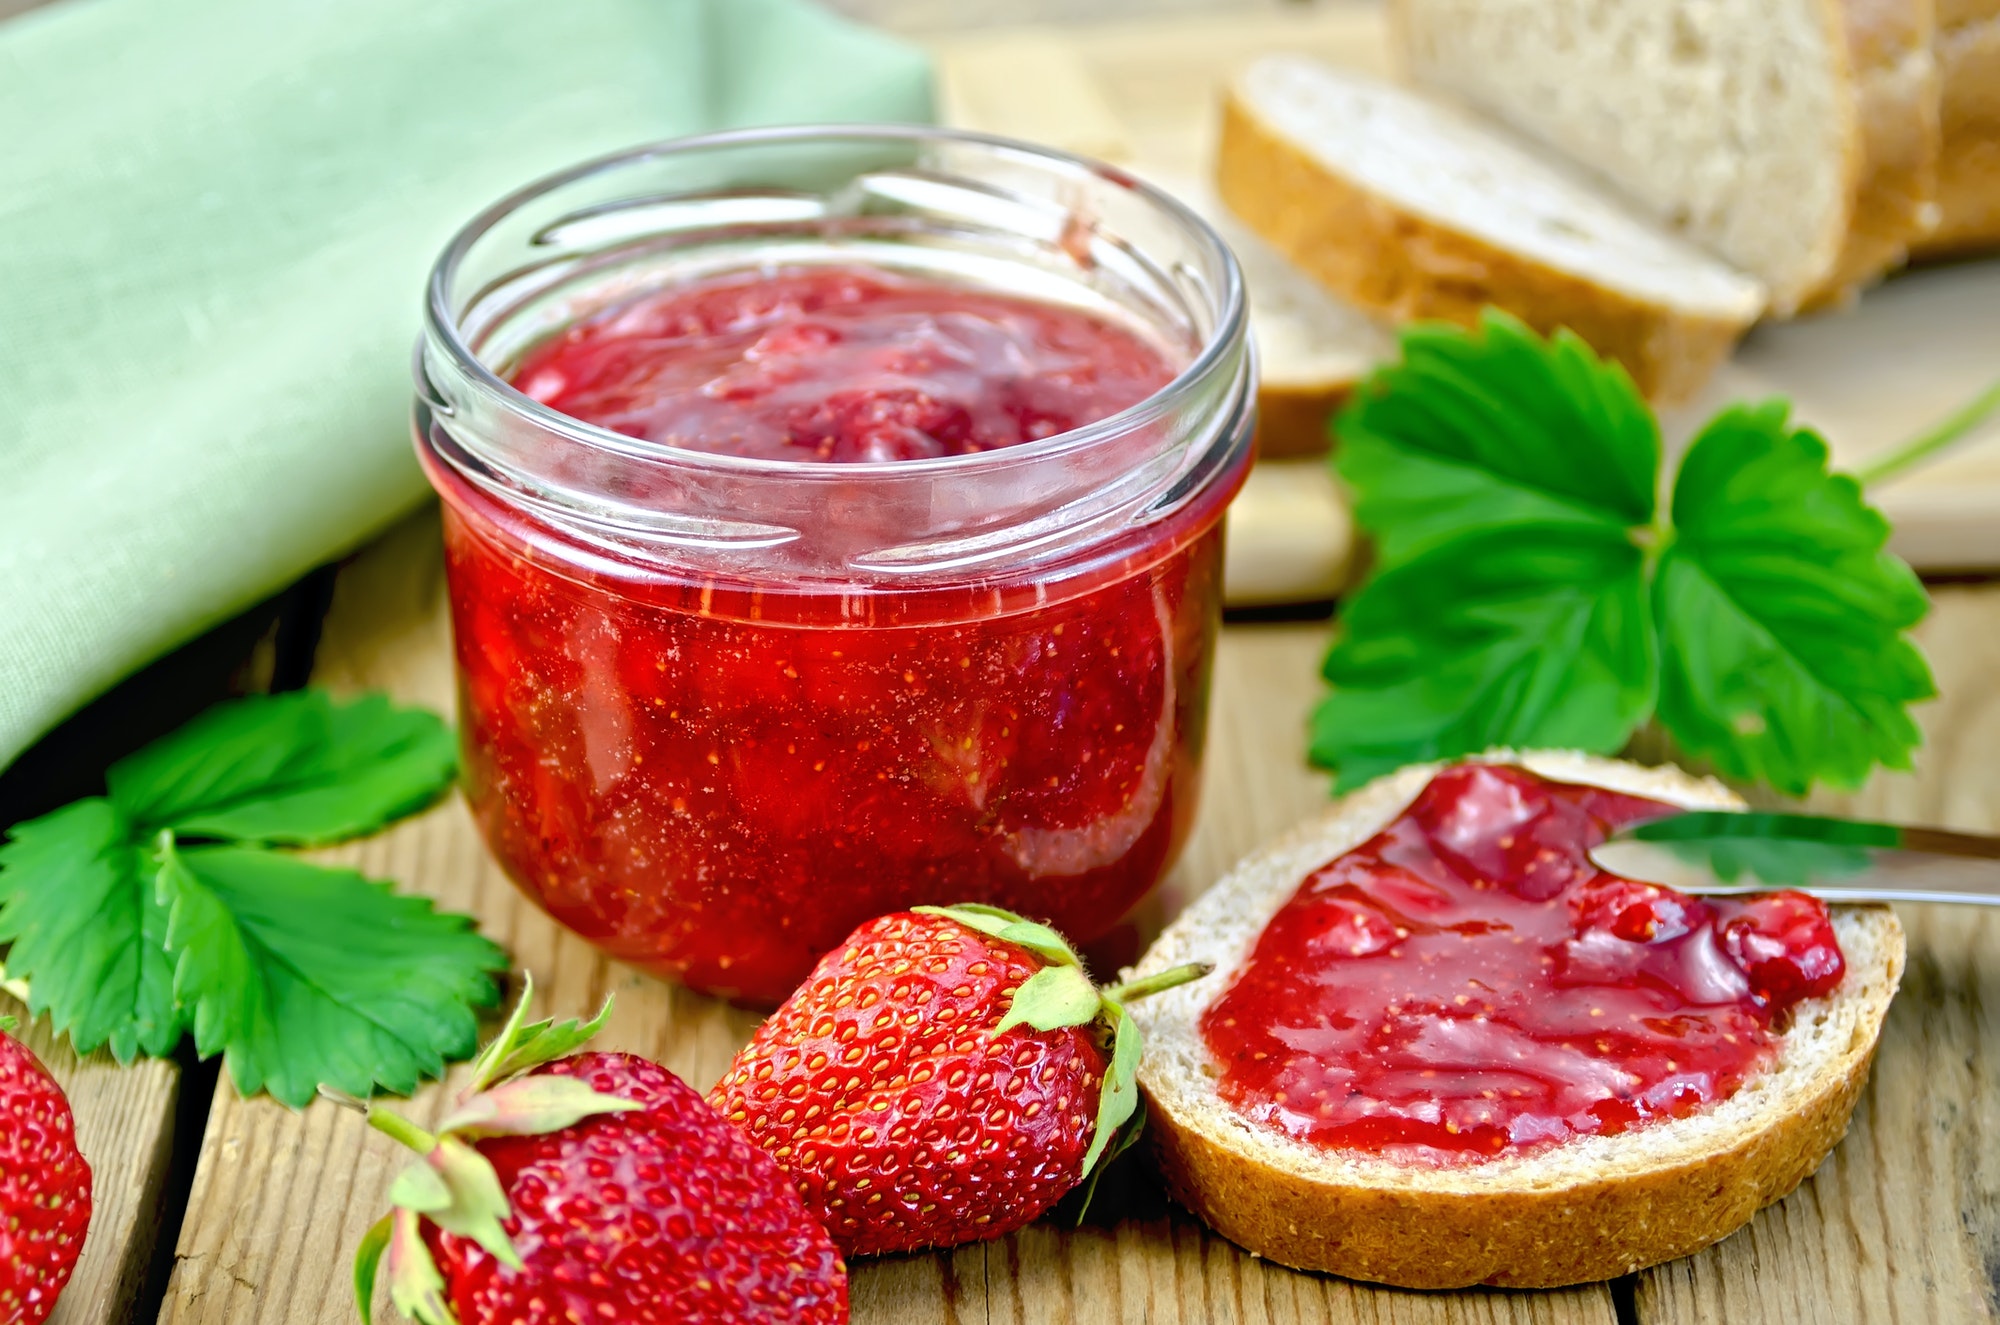 Jam strawberry with bread on the board